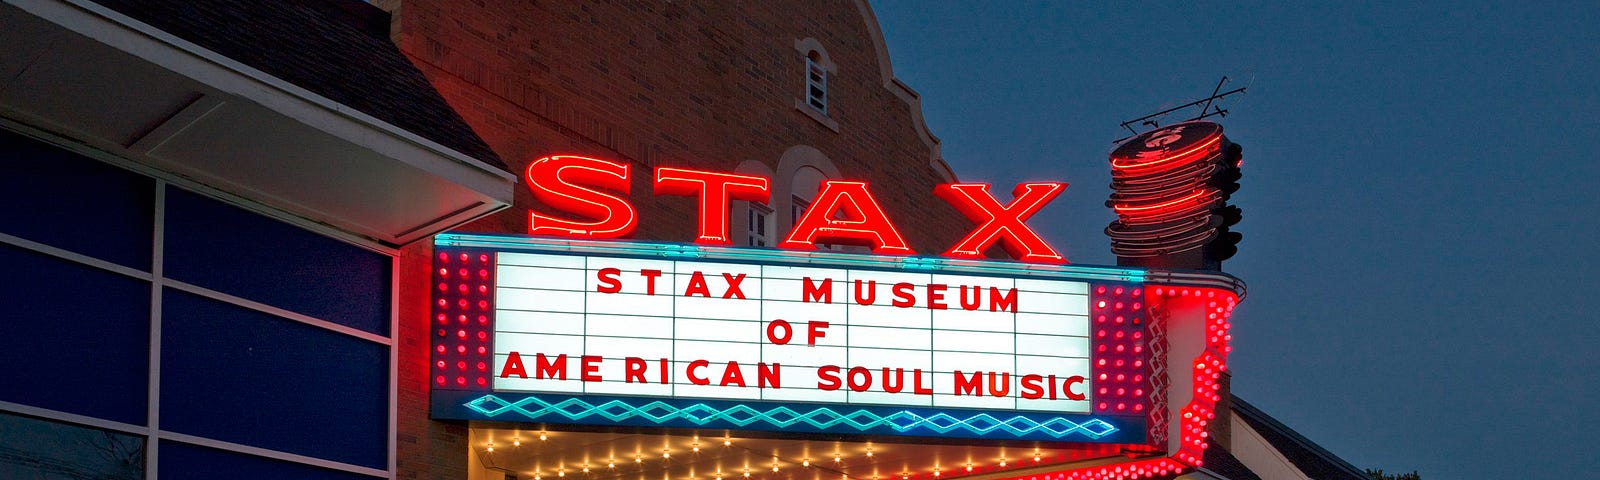 Photograph of Stax Records Museum building in Memphis, Tennessee